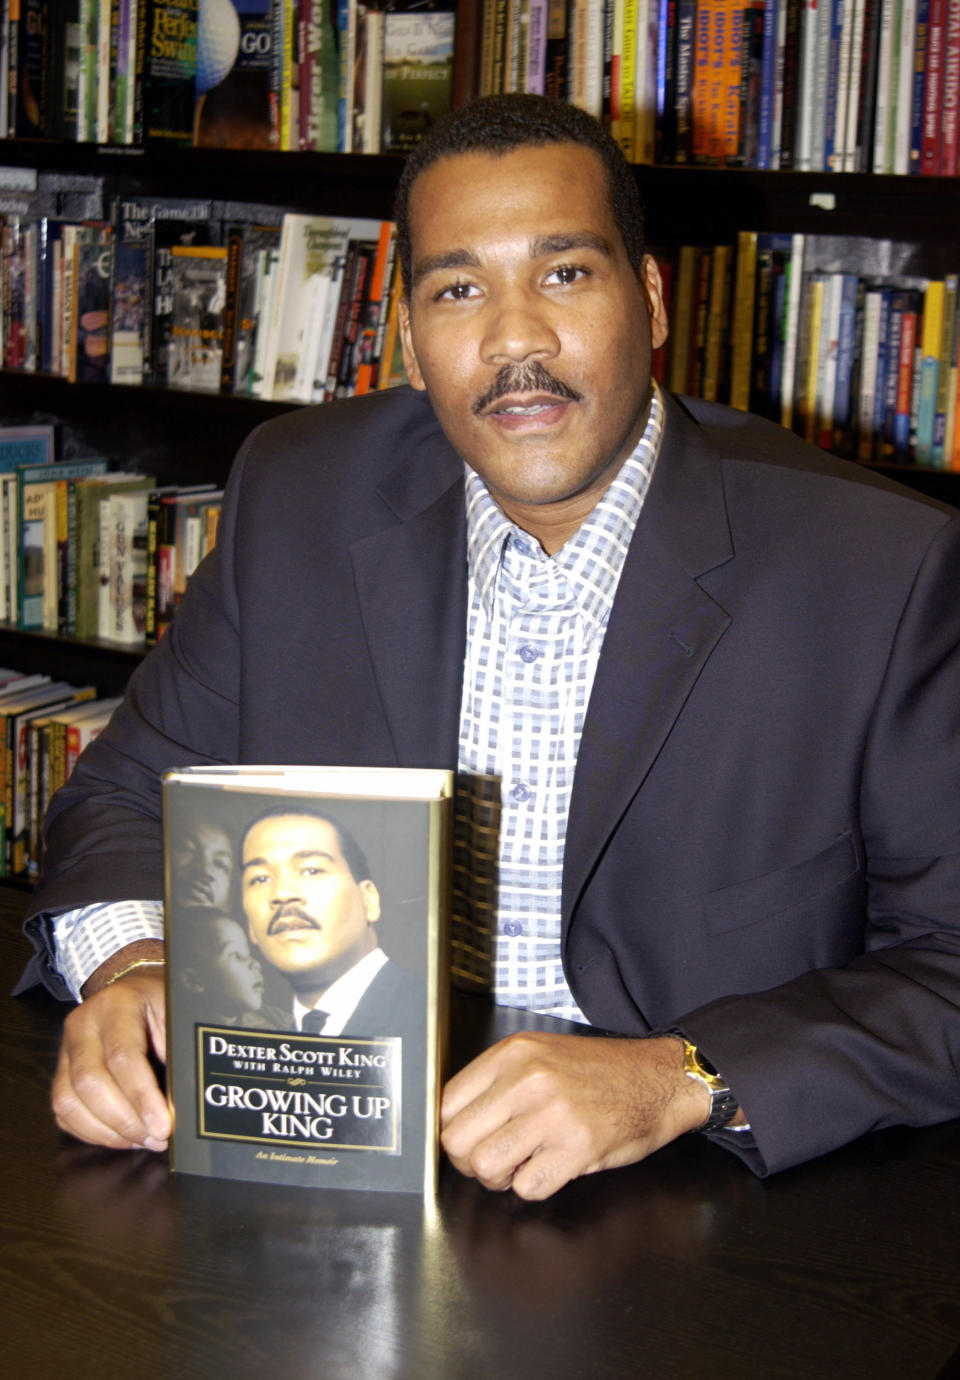 Dexter Scott King during Dexter Scott King Book Signing His New Book “Growing Up King” at Barnes & Noble at The Grove at Barnes & Noble at The Grove in Los Angeles, California, United States.